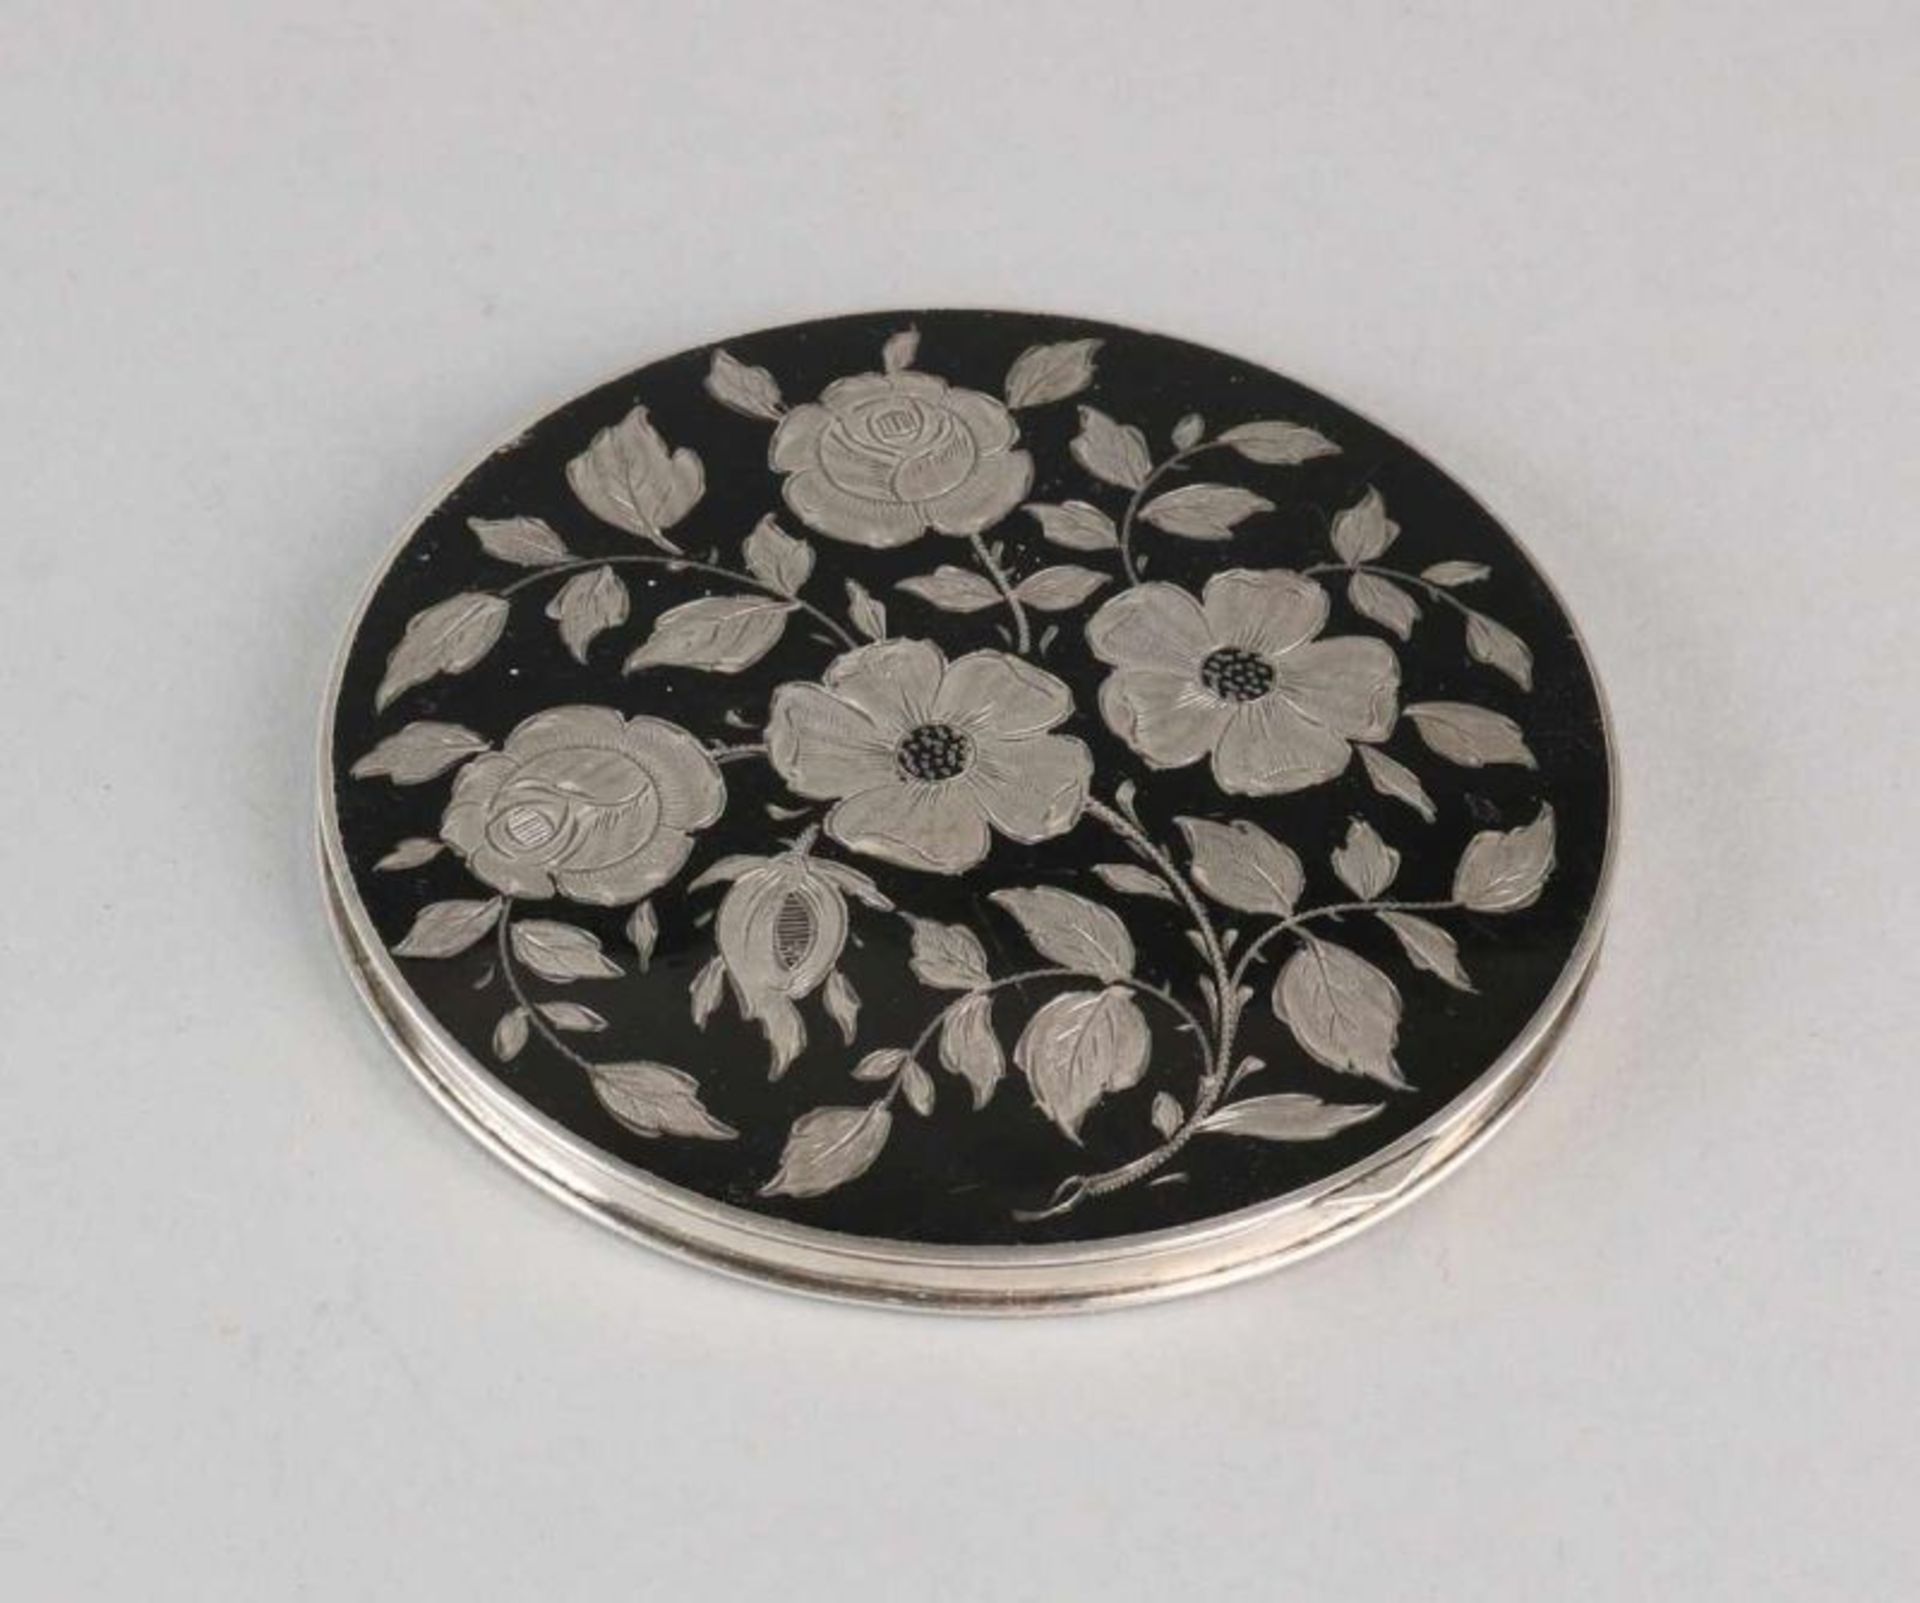 835/000 black enamelled silver powder box with beautiful floral lid inside with faceted mirror.